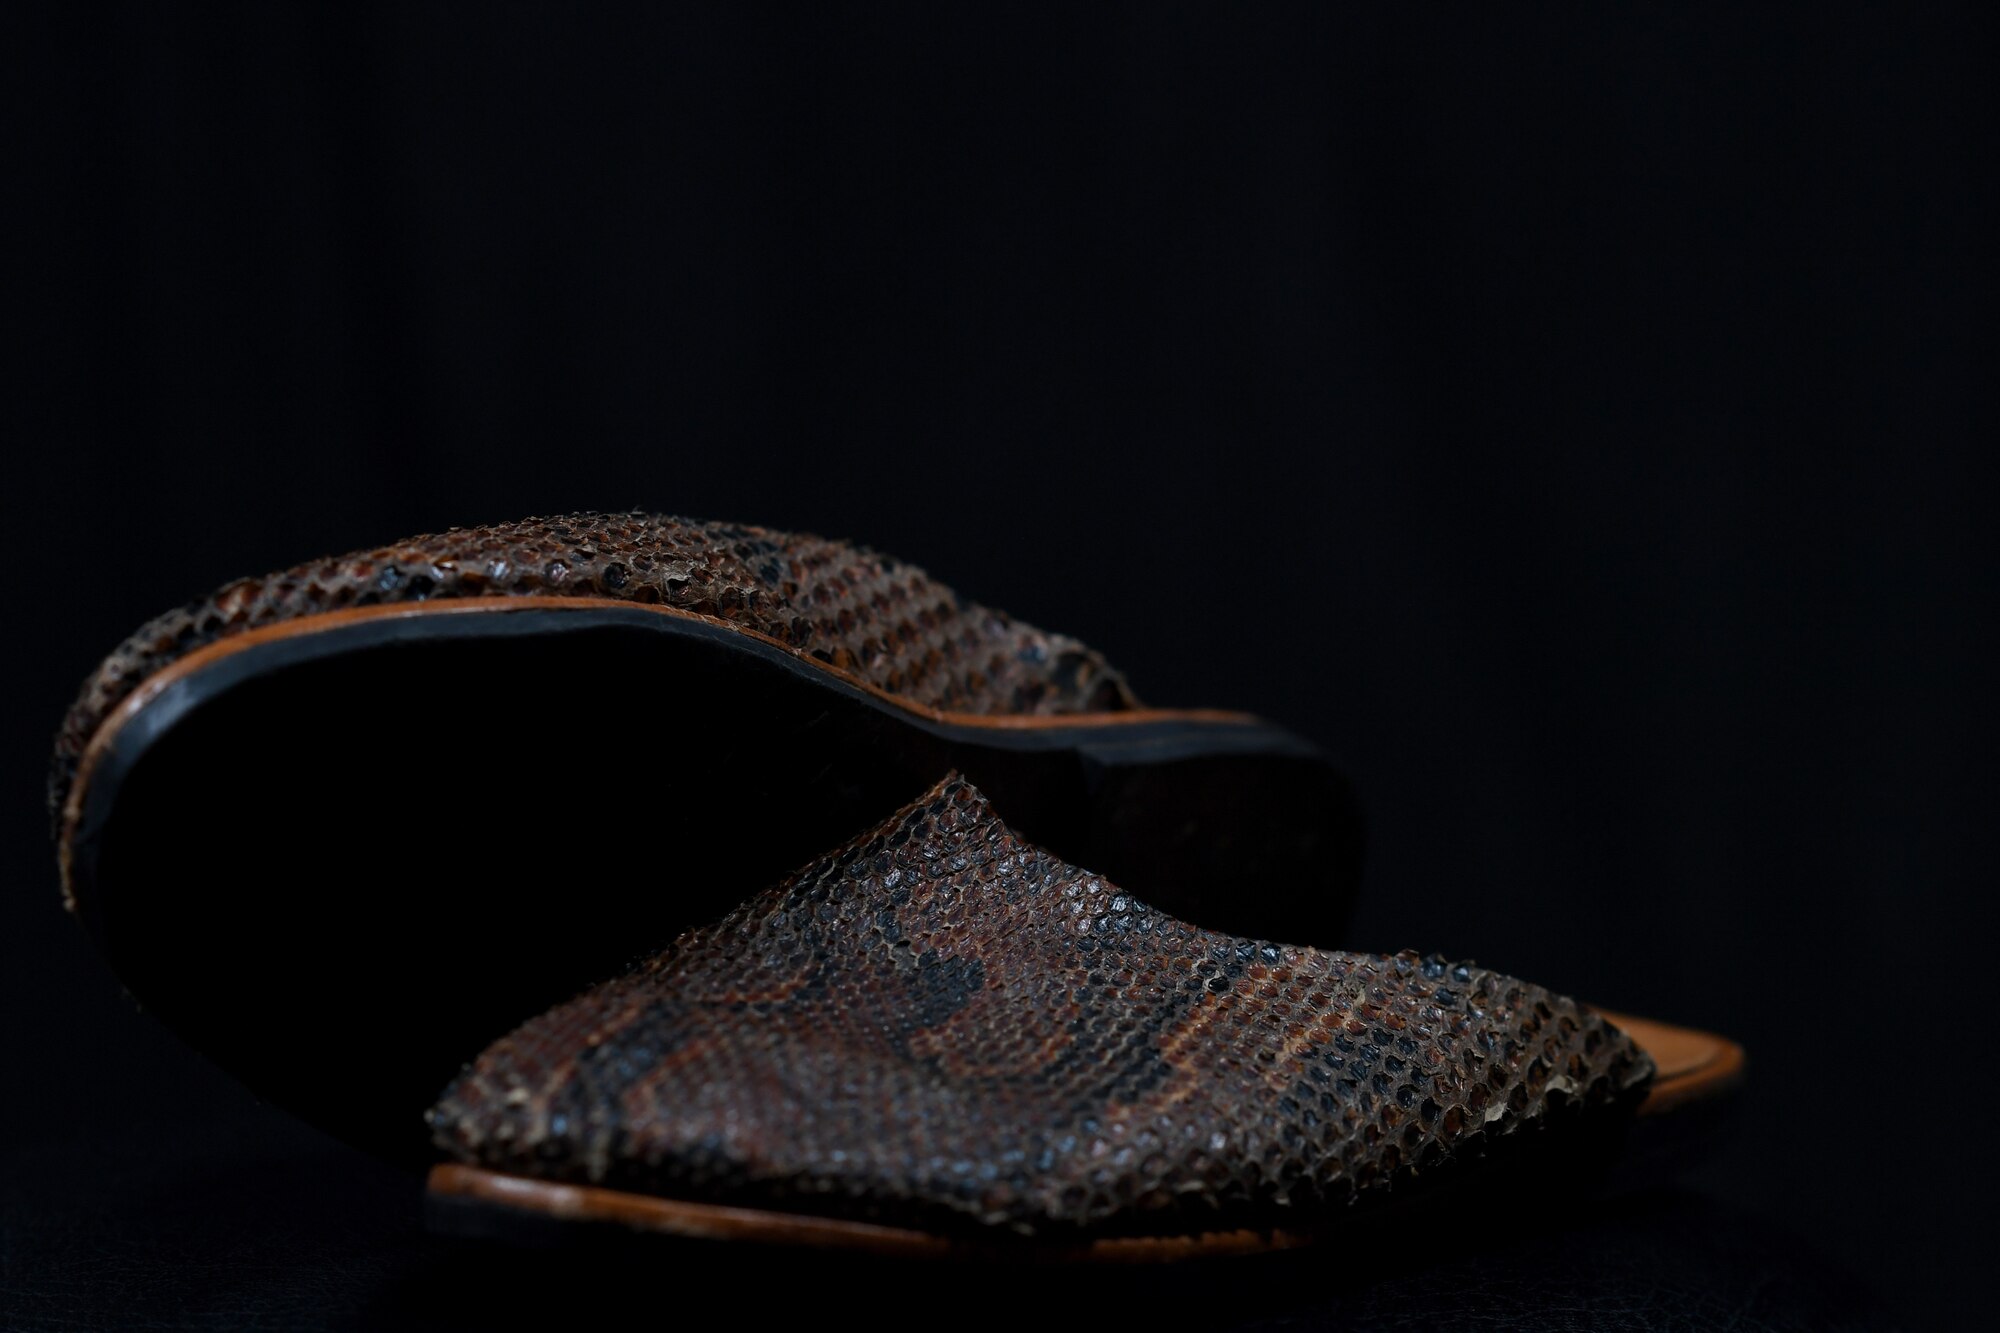 Snakeskin shoes belonging to U.S. Air Force Tech. Sgt. Francis Strother, recruiter for the 145th Airlift Wing, sit on display at the North Carolina Air National Guard (NCANG) Base, Charlotte Douglas International Airport, Jan. 17, 2019. Strother tells a story of how he came from Monrovia, Liberia following a civil war in his country that lasted almost eight years. At times, Strother walked barefoot 10 miles to get to school and other times he wore shoes like the ones on display.